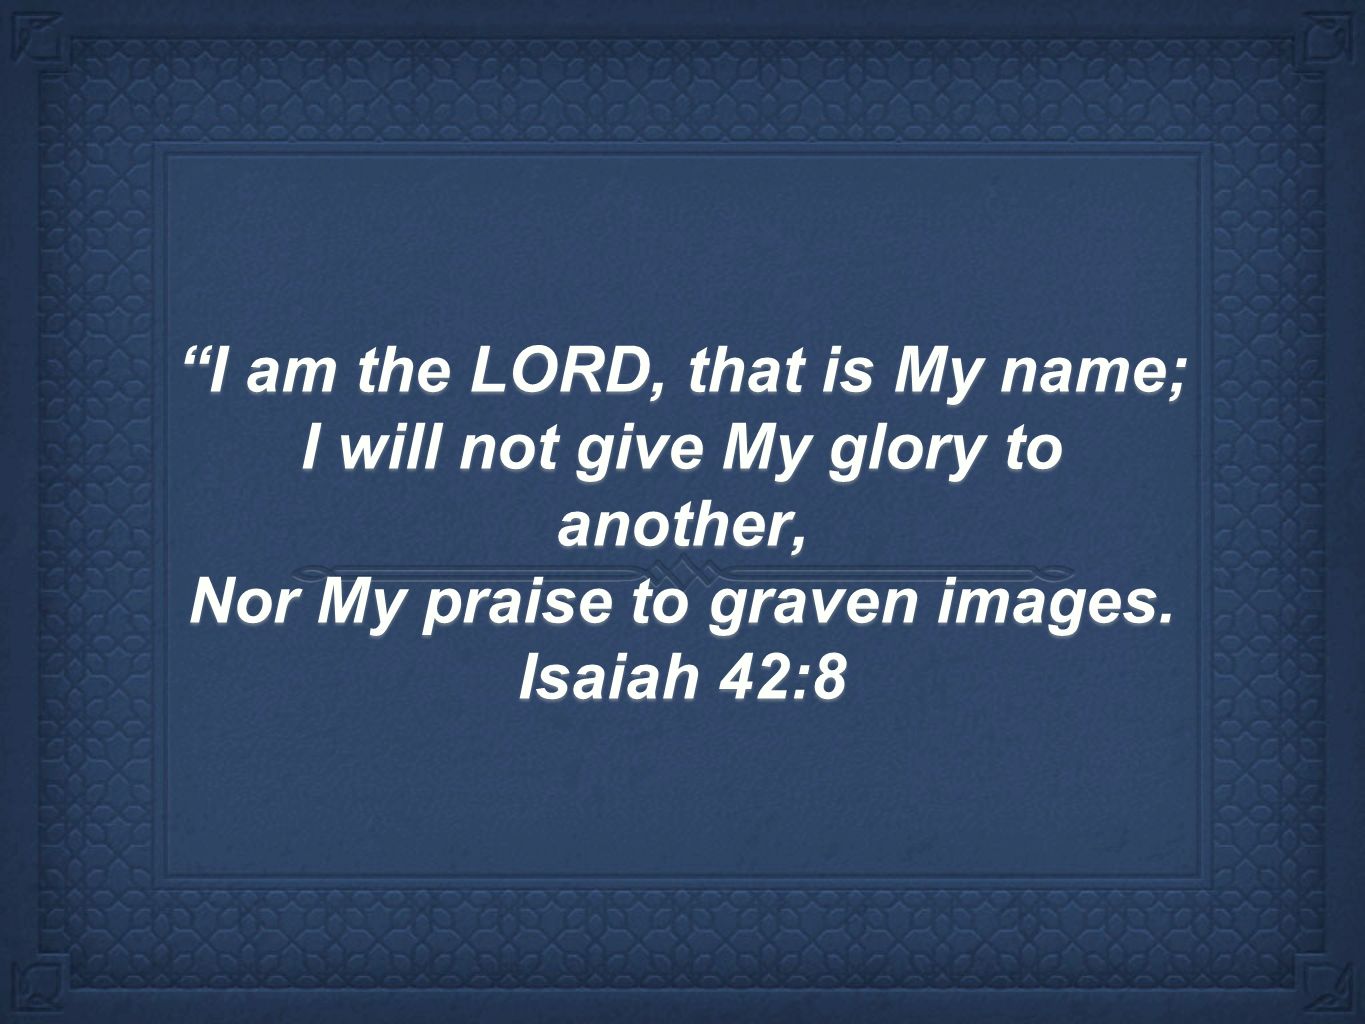 I am the LORD, that is My name; I will not give My glory to another, Nor My praise to graven images.